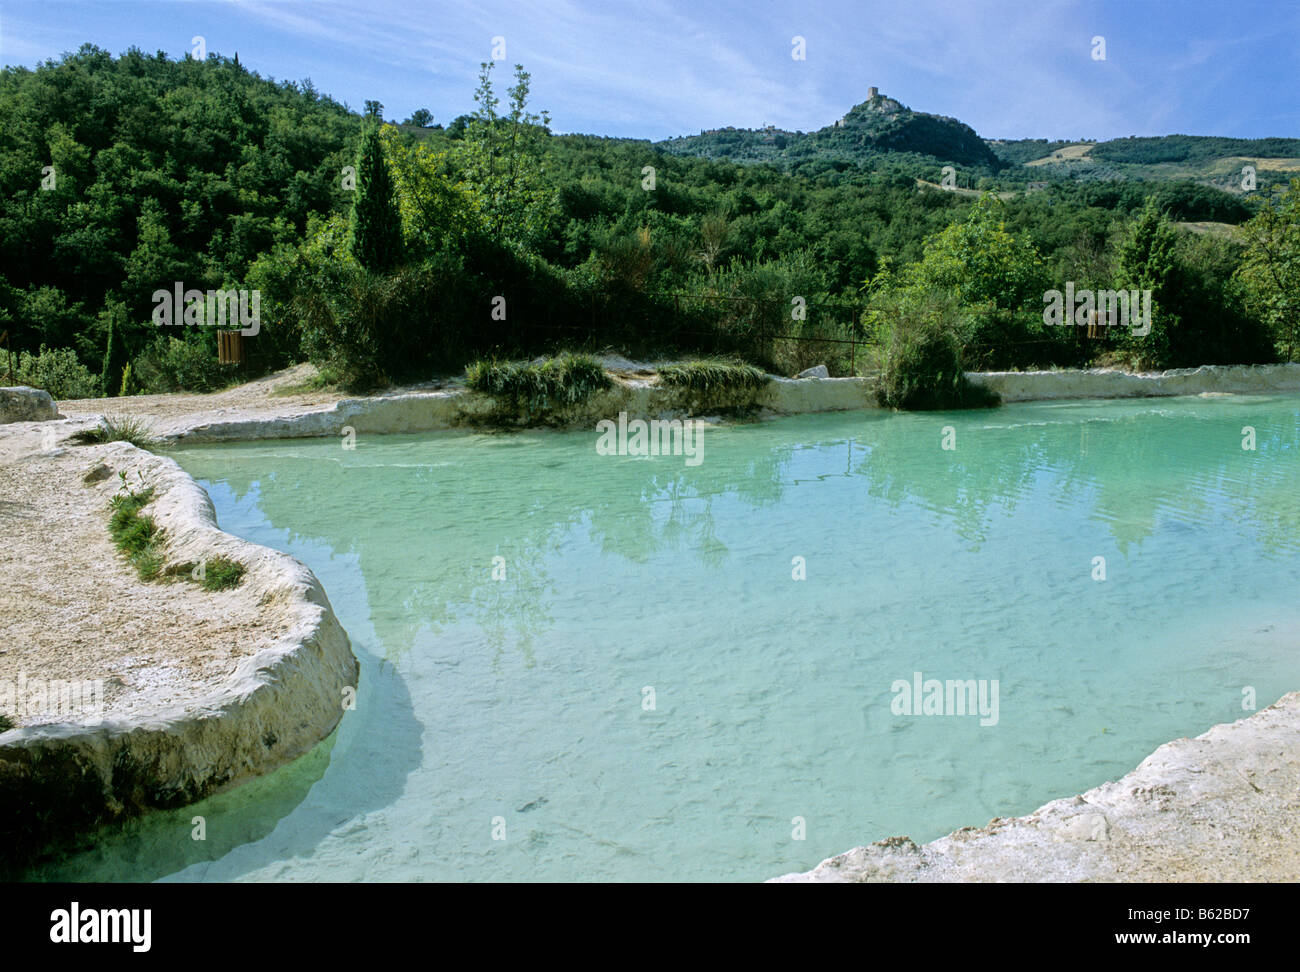 Thermal waters in the Parco dei Mulini, Bagno Vignoni, at back the Rocca d' Orcia, Siena province, Tuscany, Italy, Europe Stock Photo